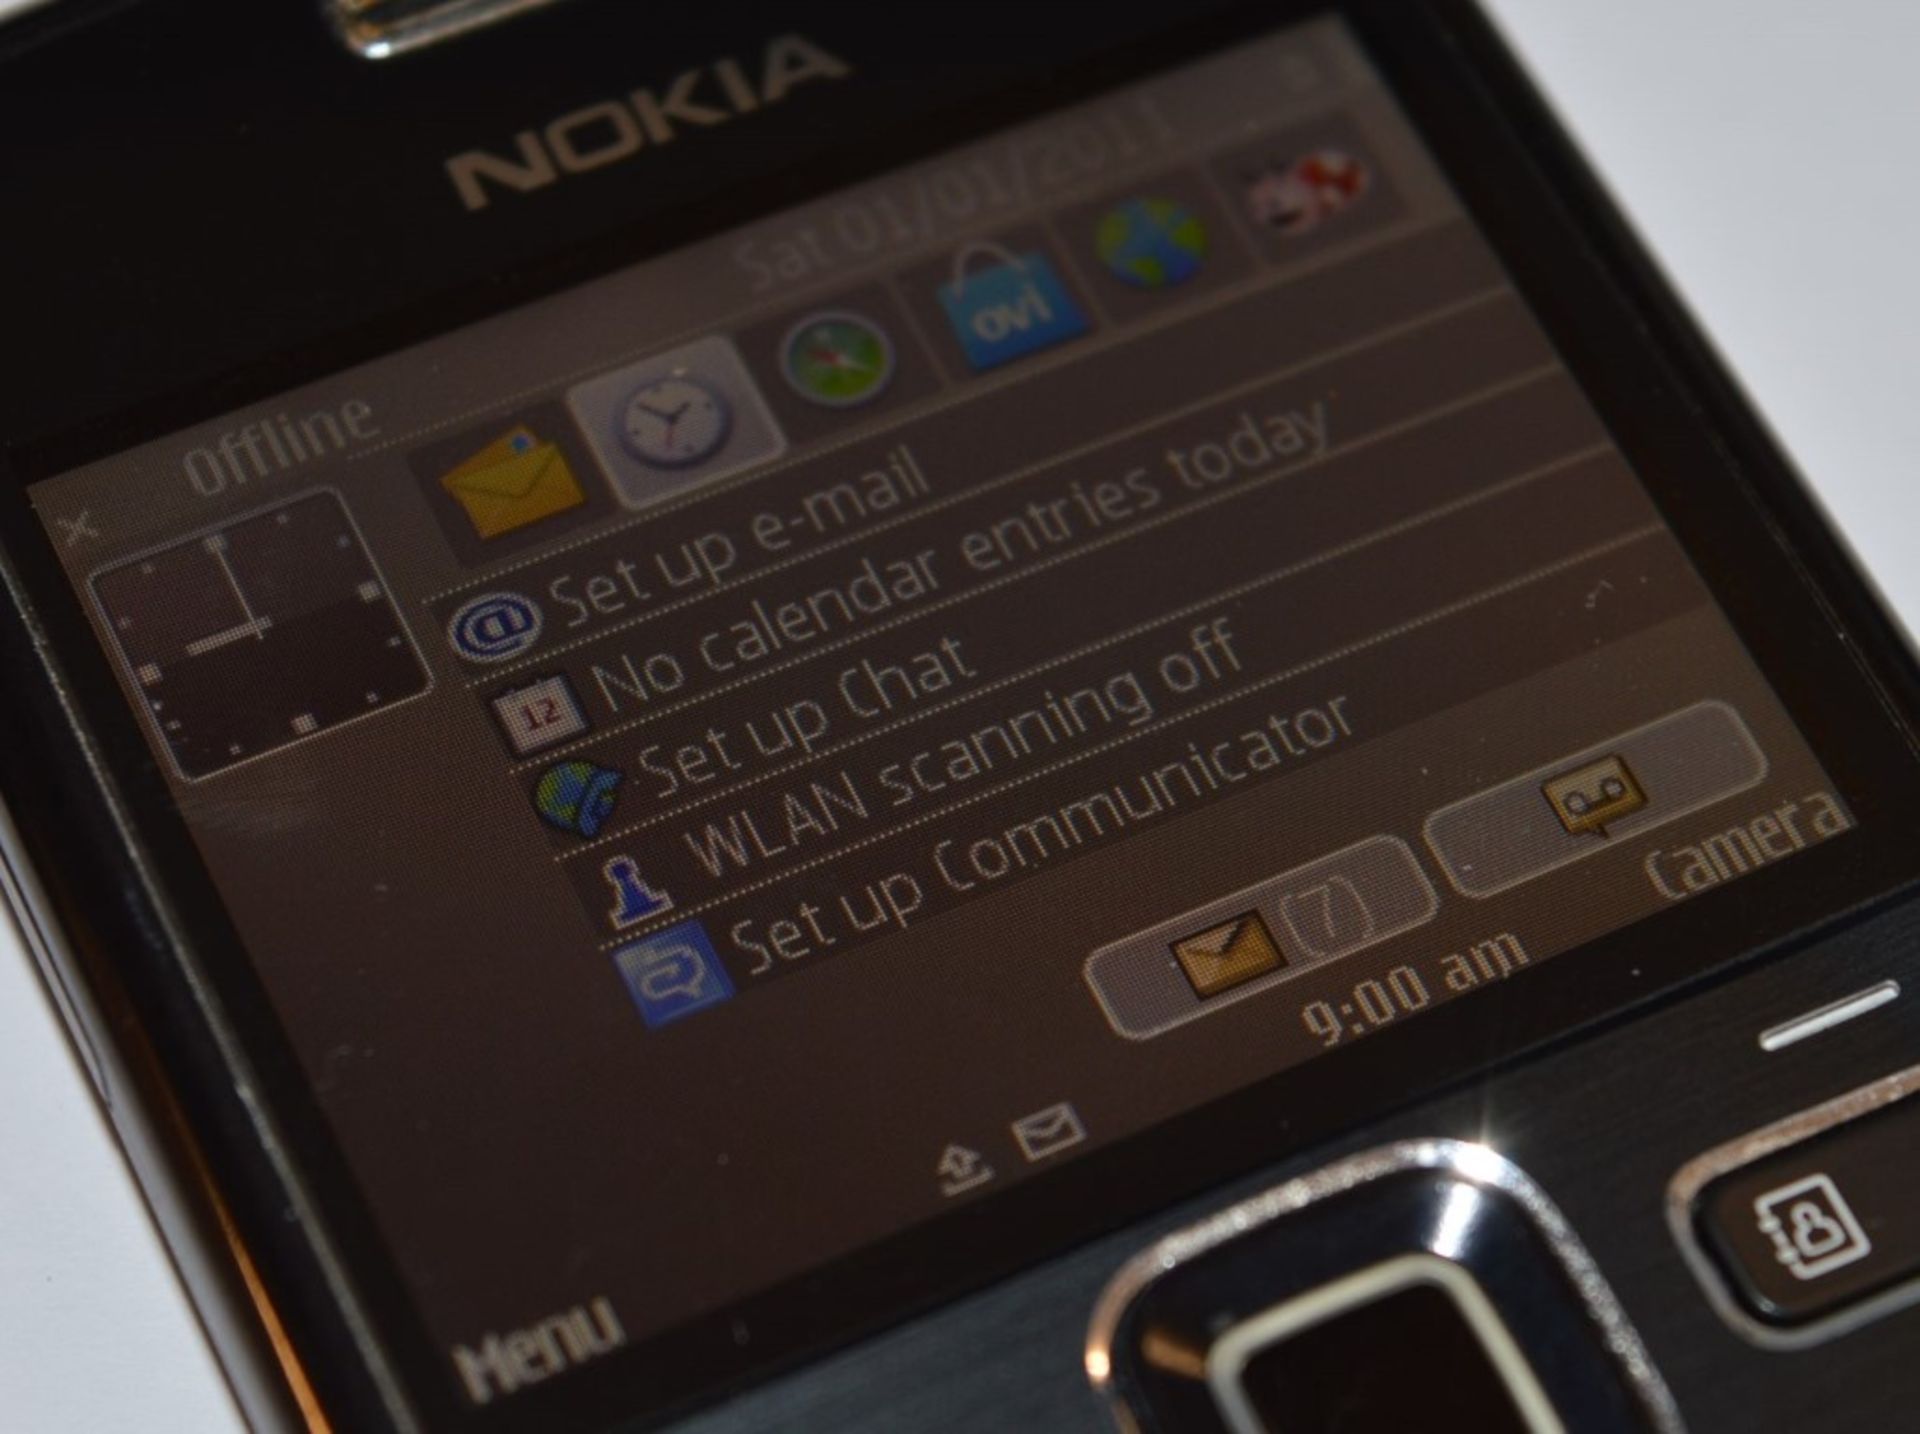 1 x Nokia E72 Mobile Phone Handset With Charger - Features Qwerty Keyboard, 600mhz CPU, 250mb - Image 6 of 6